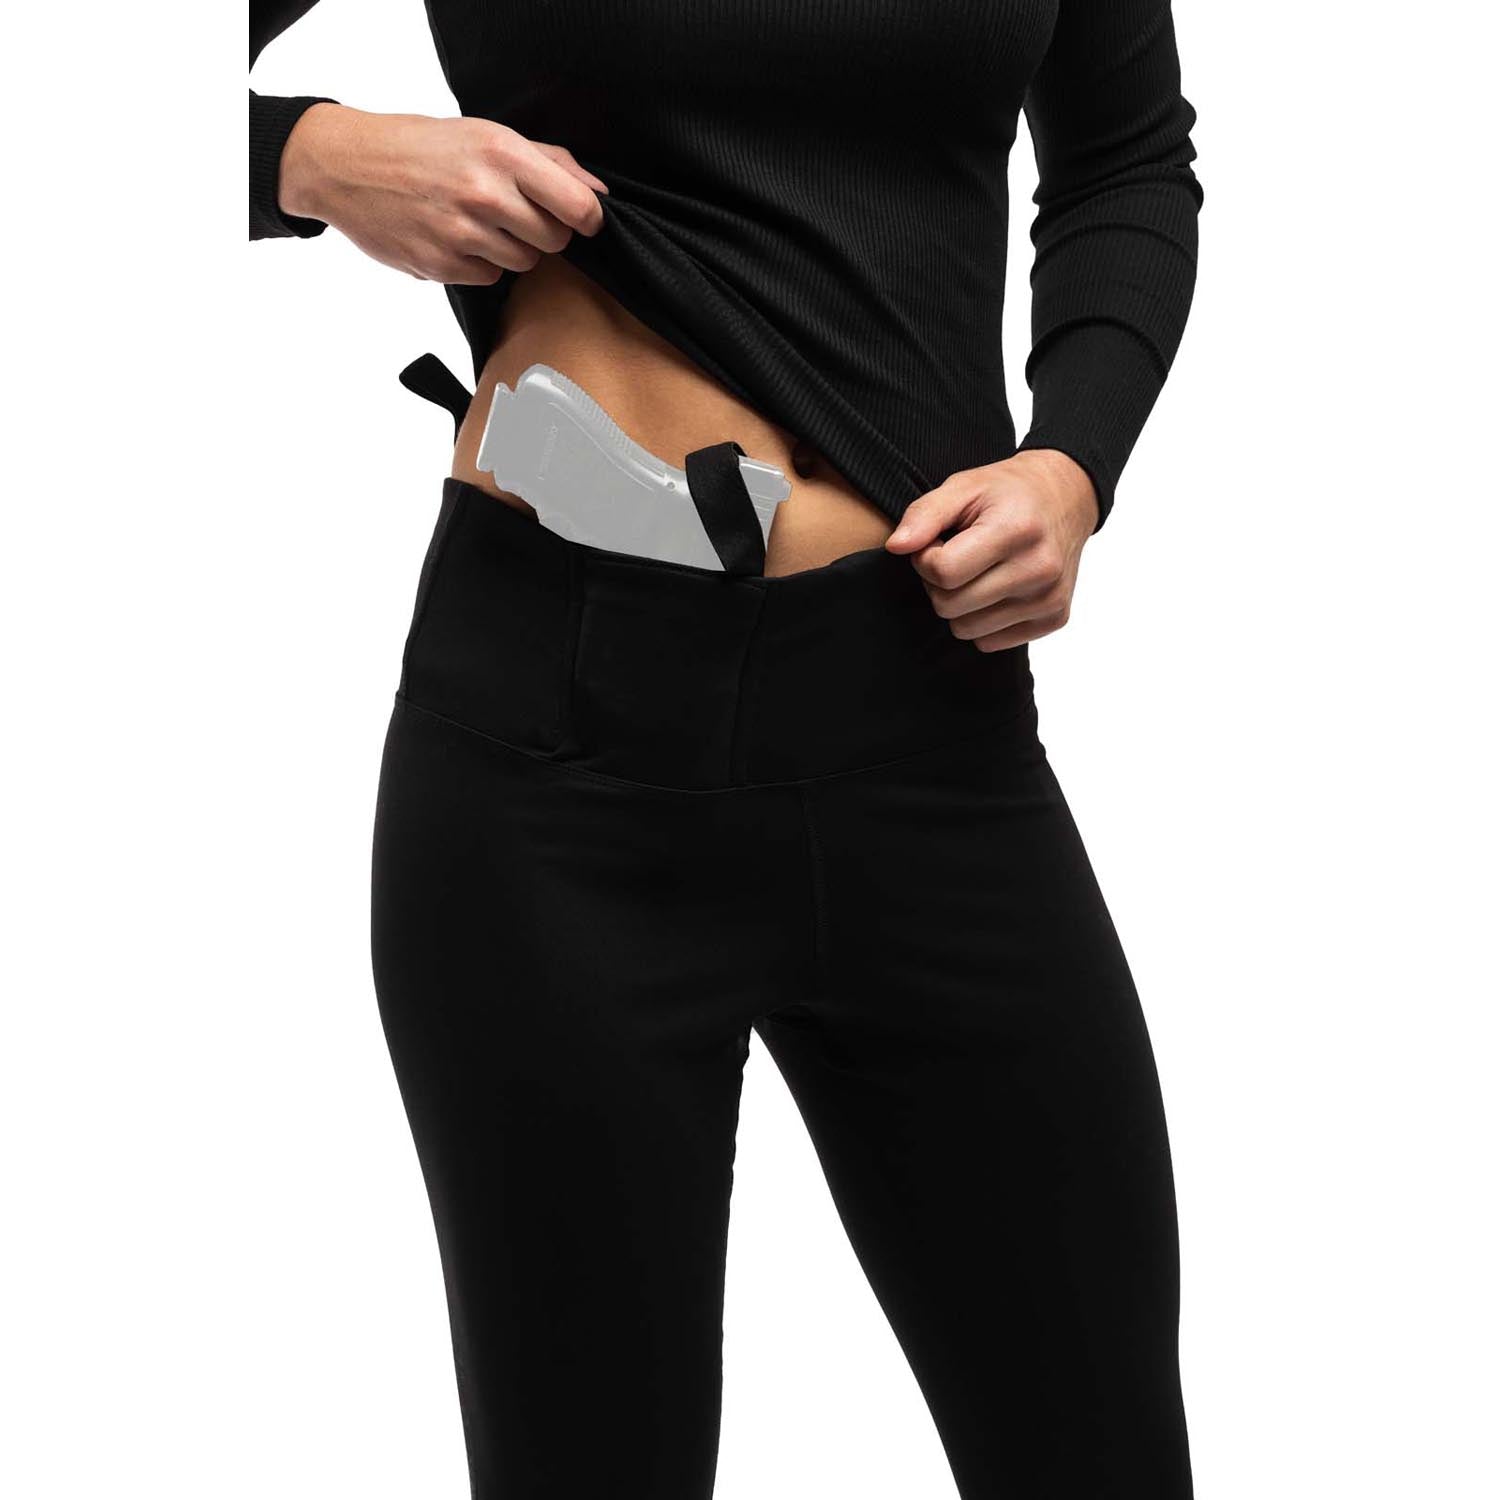 Women's Dual Holster Leggings - Concealed Carry Pants –